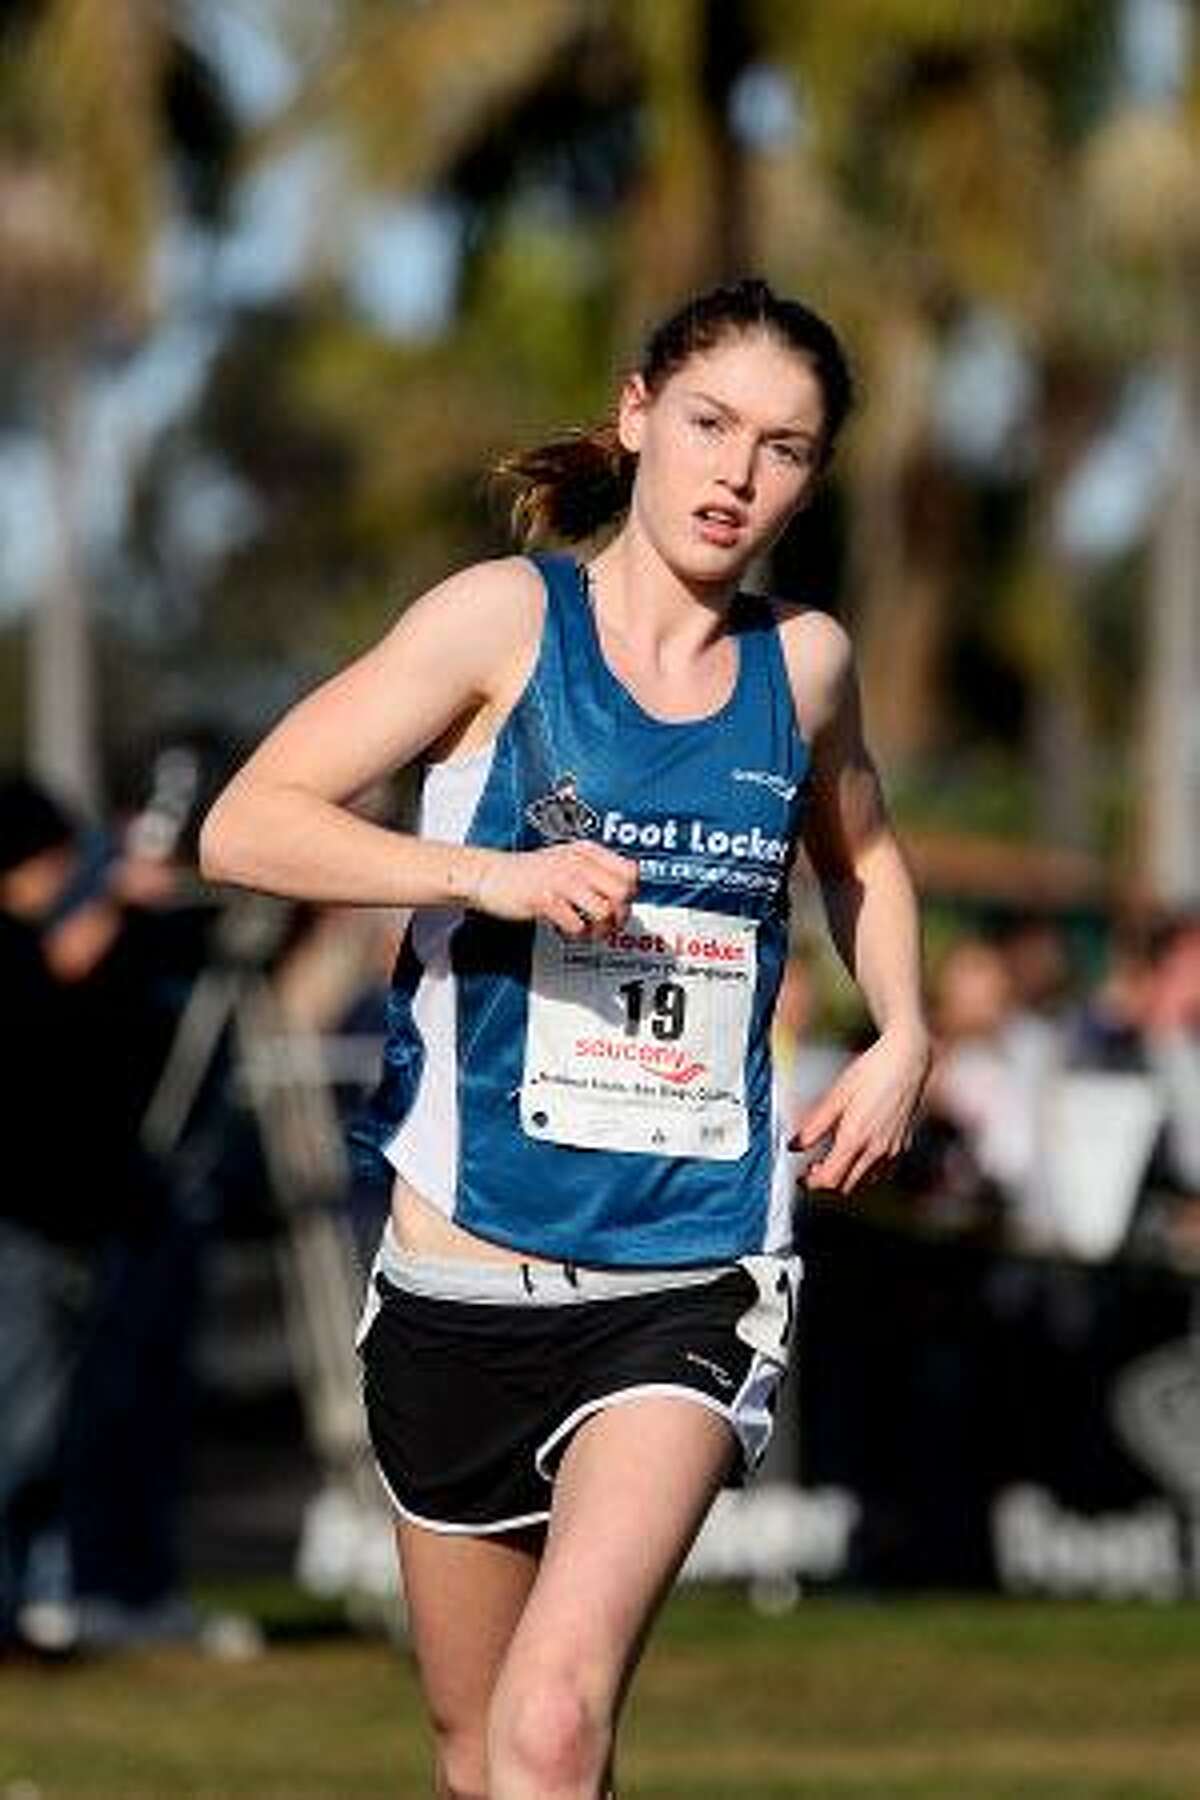 PhotoRun.net/Submitted photo Nonnewaug senior standout Jackie Nicholas finished 36th in the Foot Locker Cross Country National Finals in San Diego, Calif., Saturday.